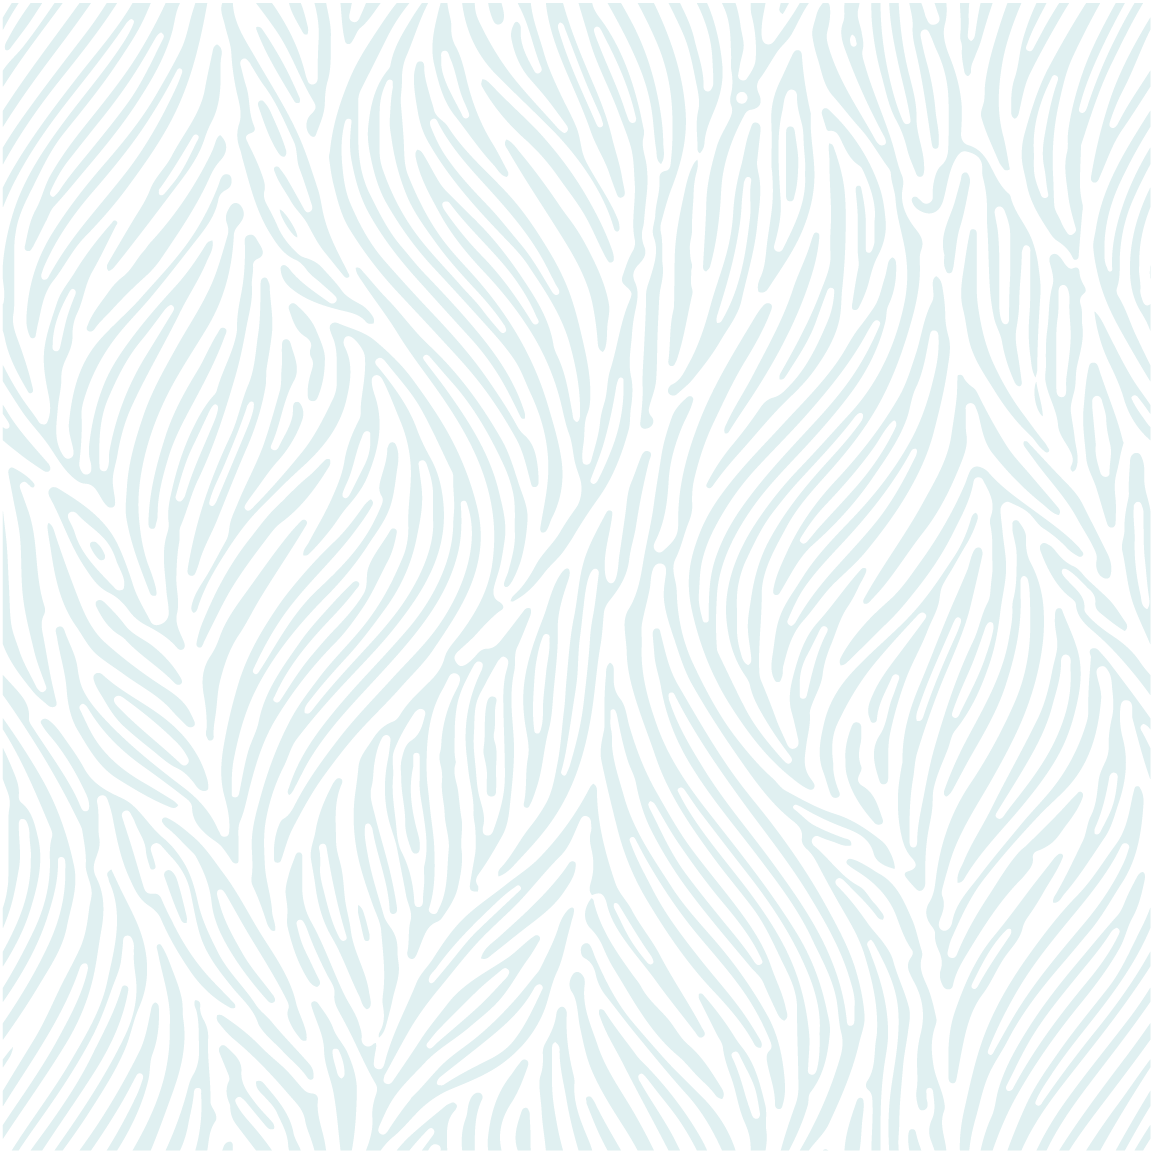 Light blue abstract leaf pattern